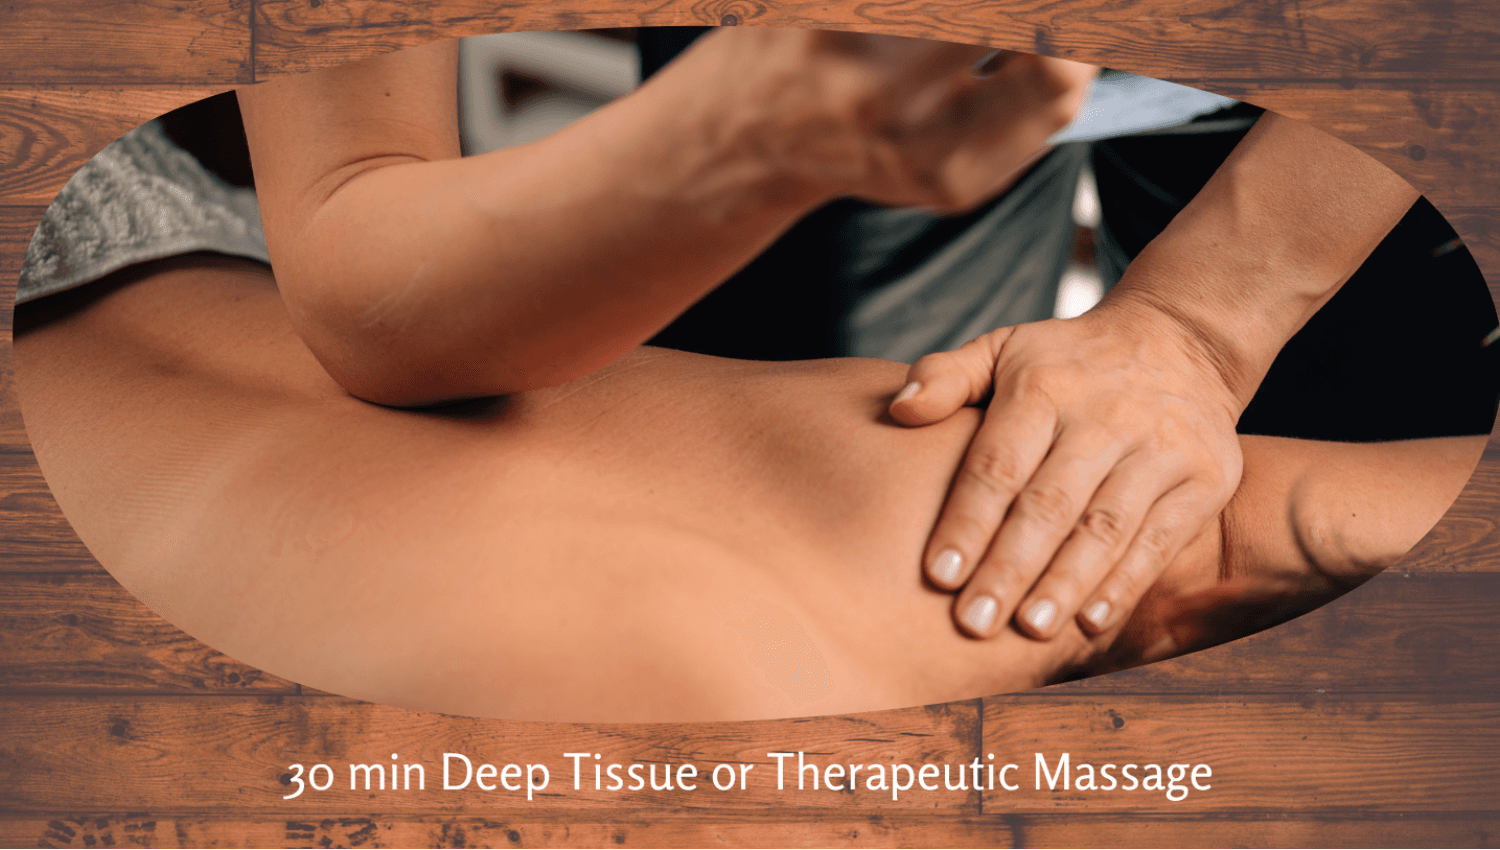 Image for Returning Clients: Therapeutic or Deep Tissue Massage 30min - 75min